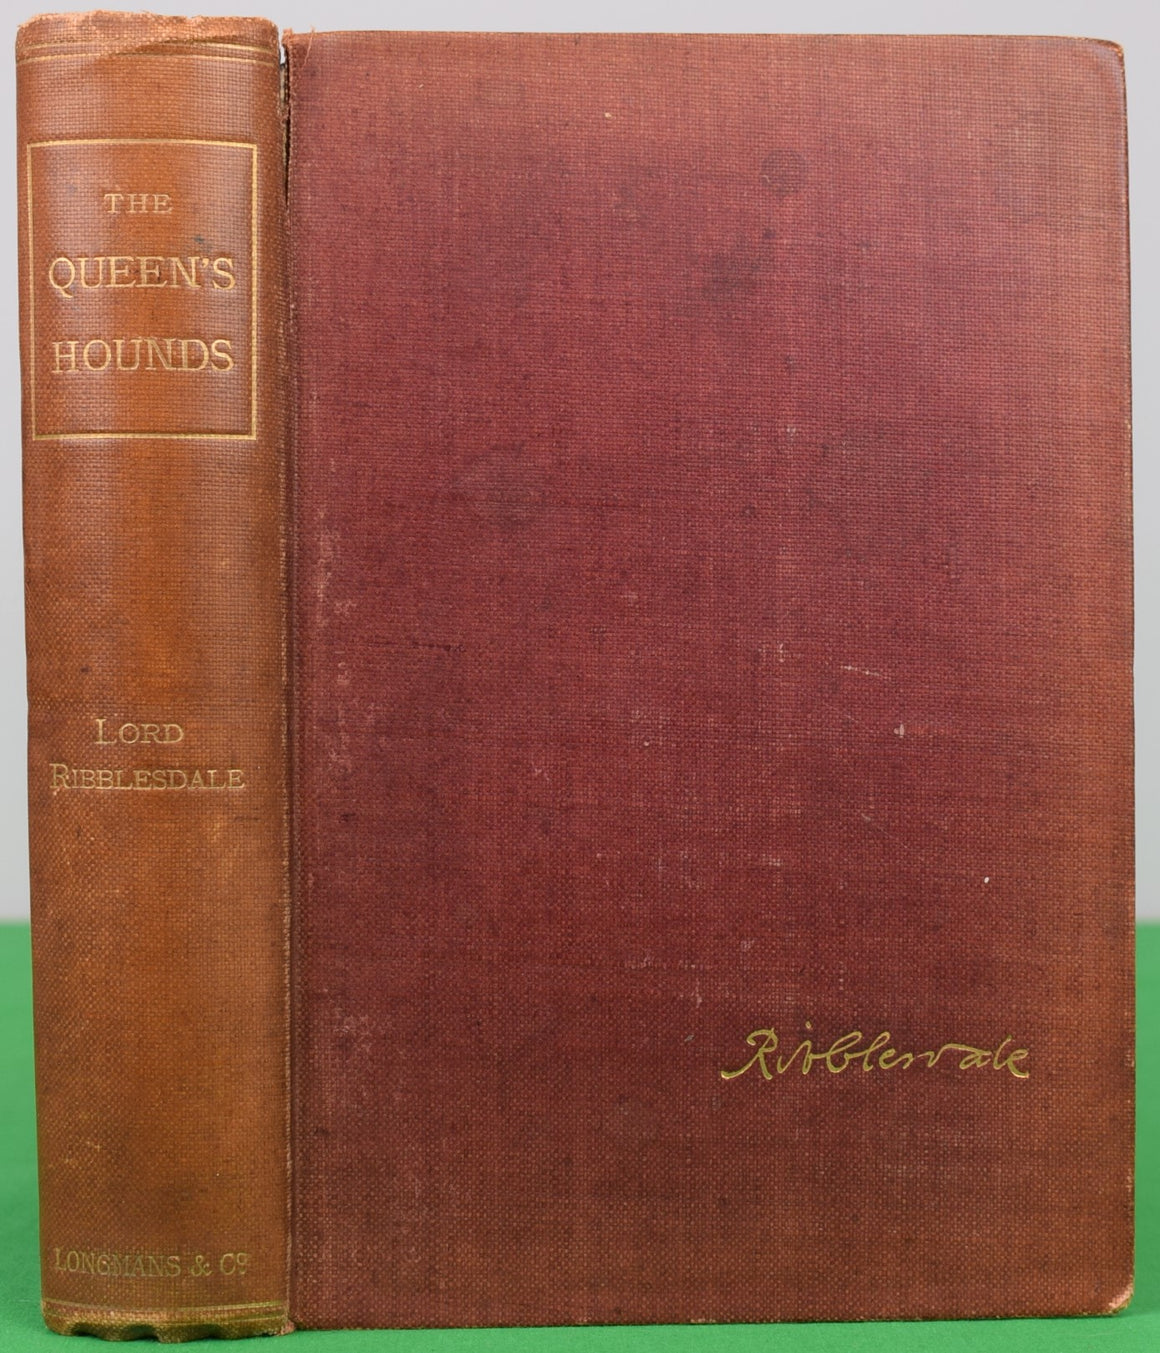 "The Queen's Hounds And Stag-Hunting Recollections" 1897 Lord Ribblesdale